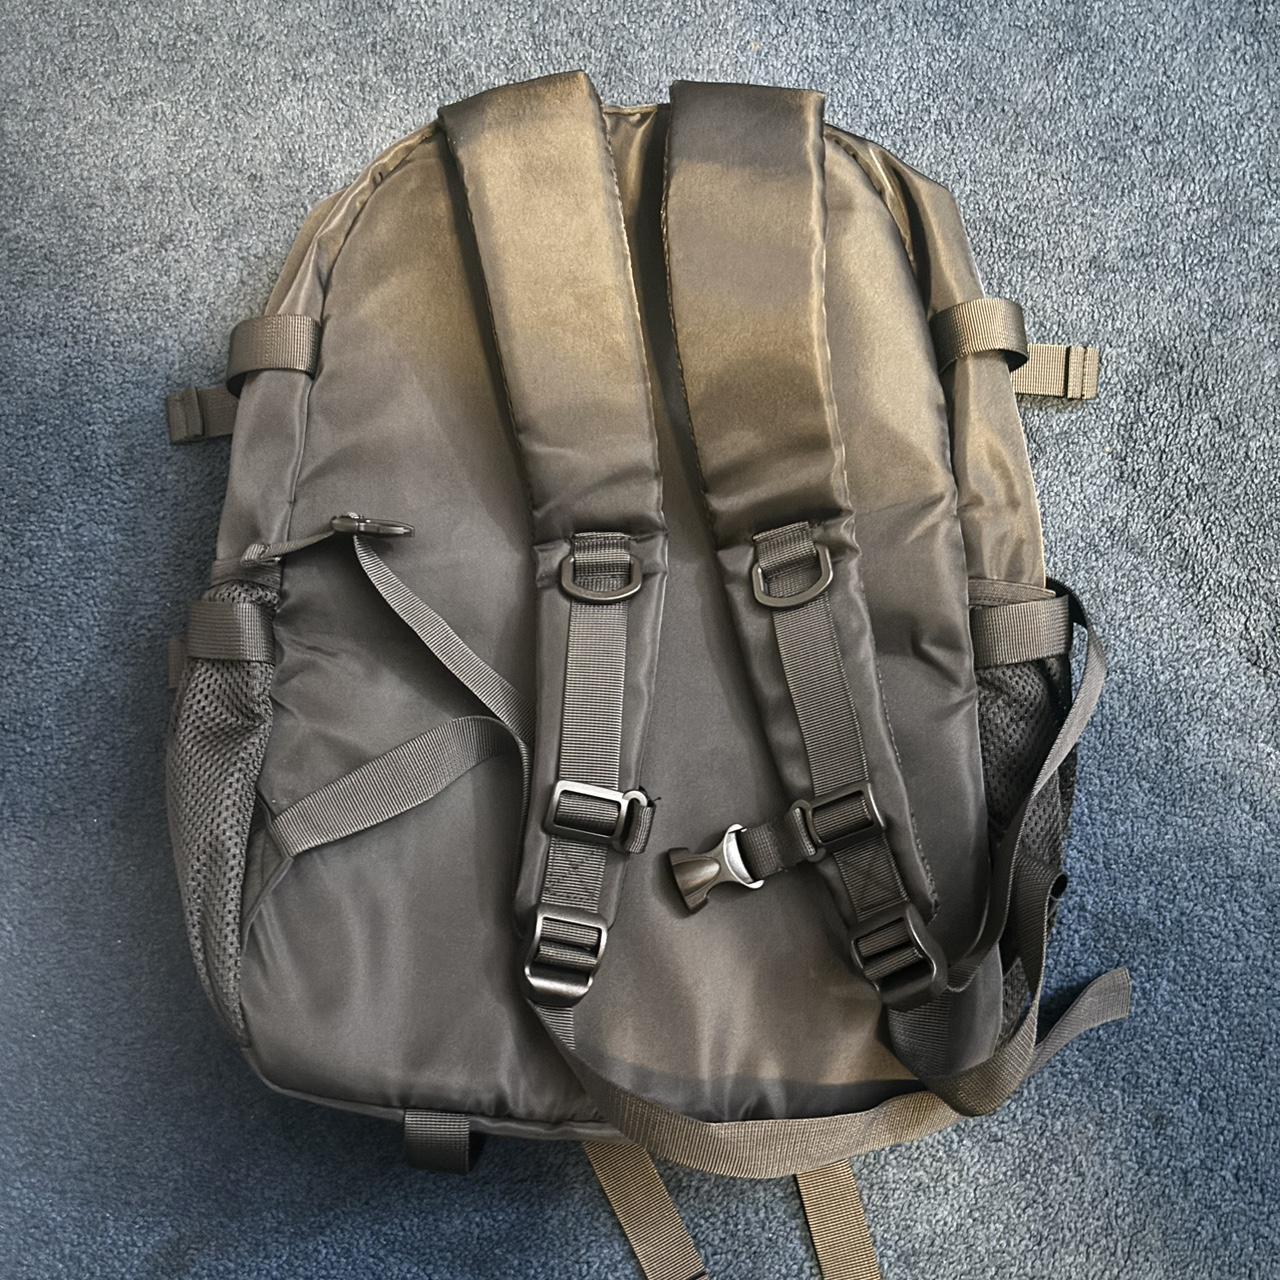 Kotemes backpack New with no tags - Depop